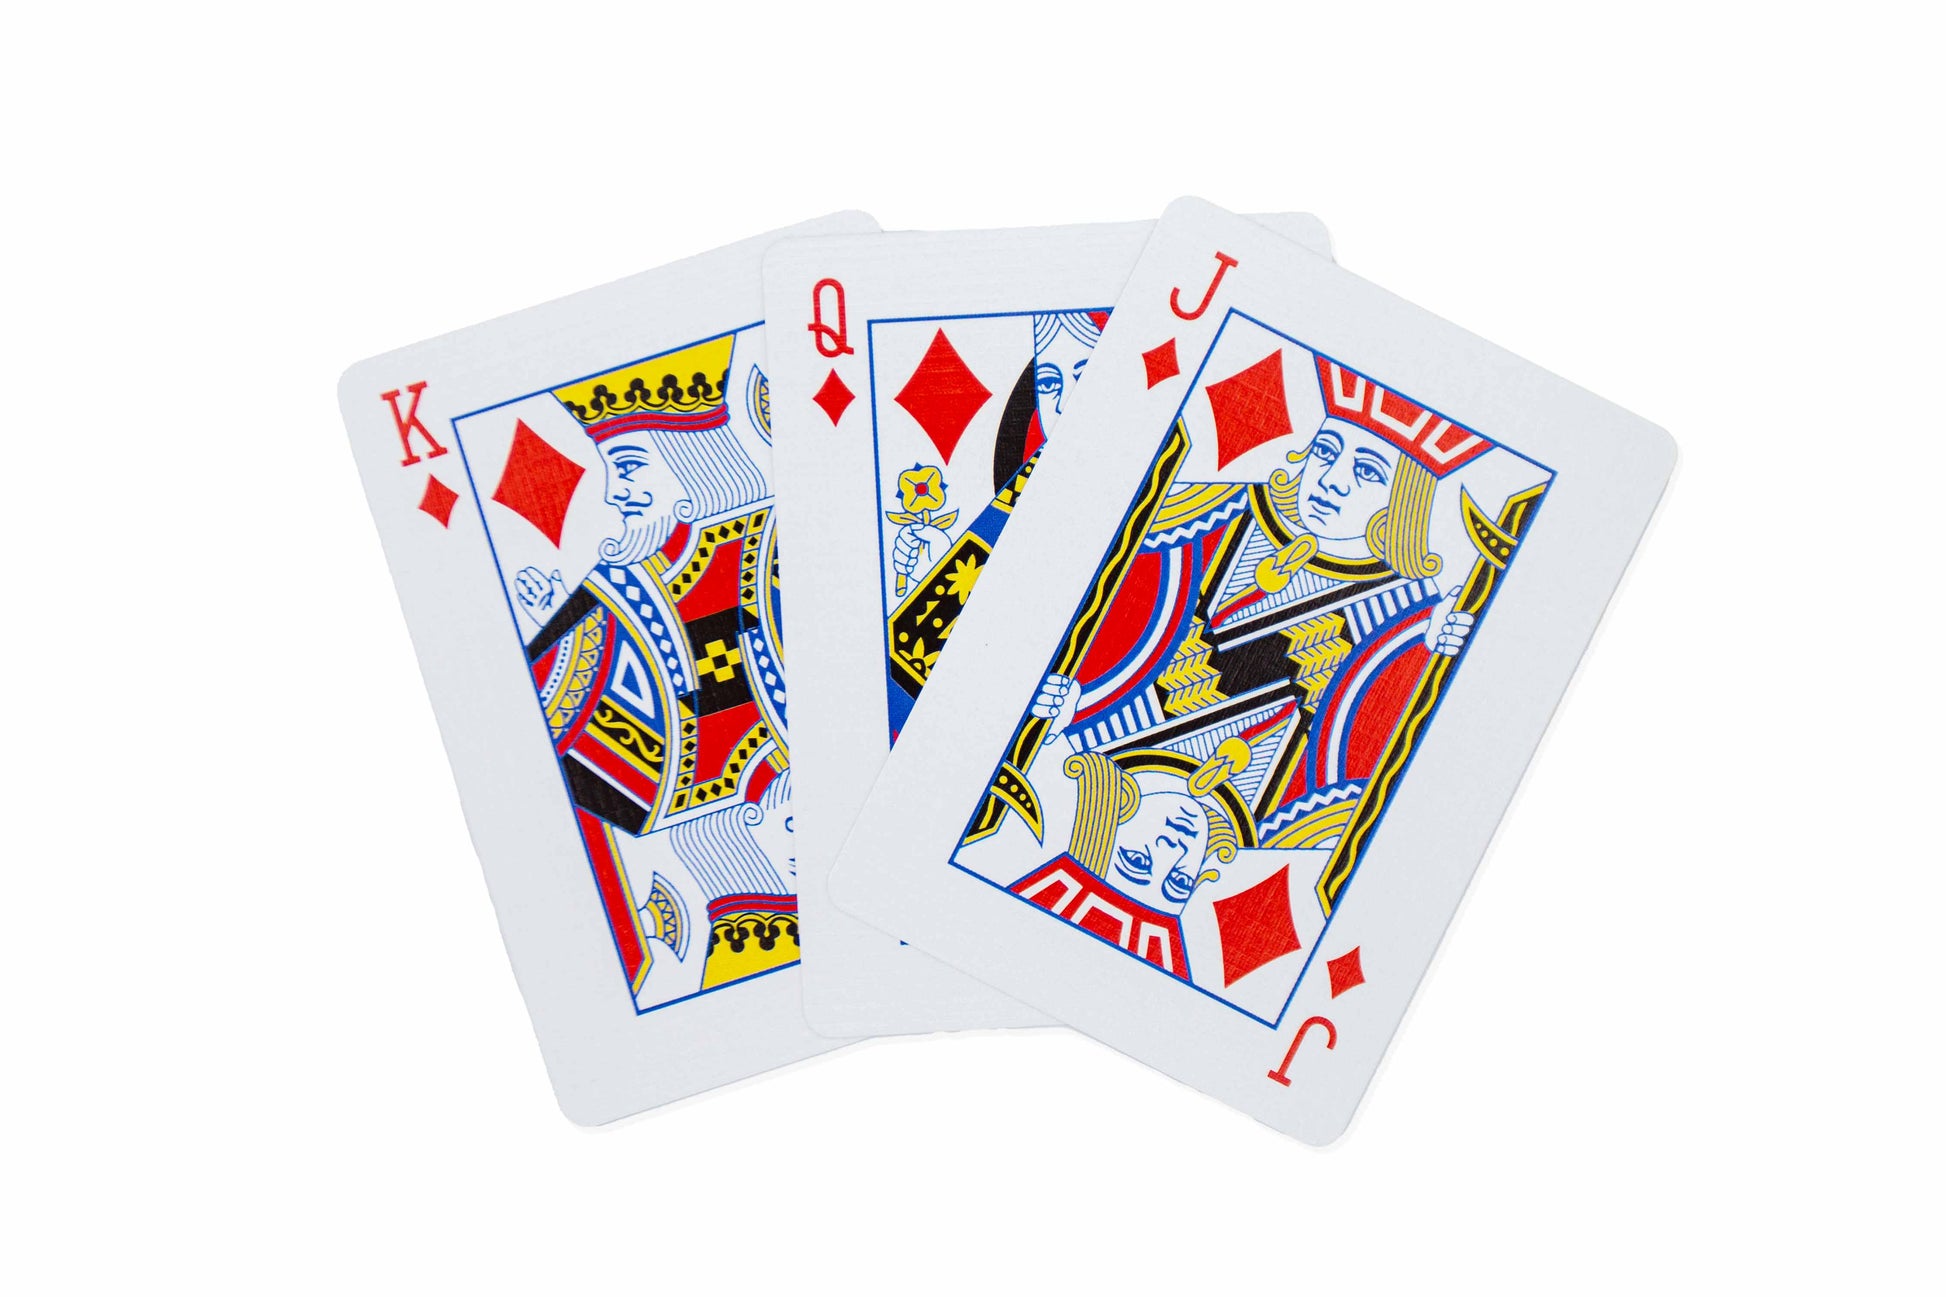 A picture of three playing cards: knight of diamonds, queen of diamonds, and jack of diamonds